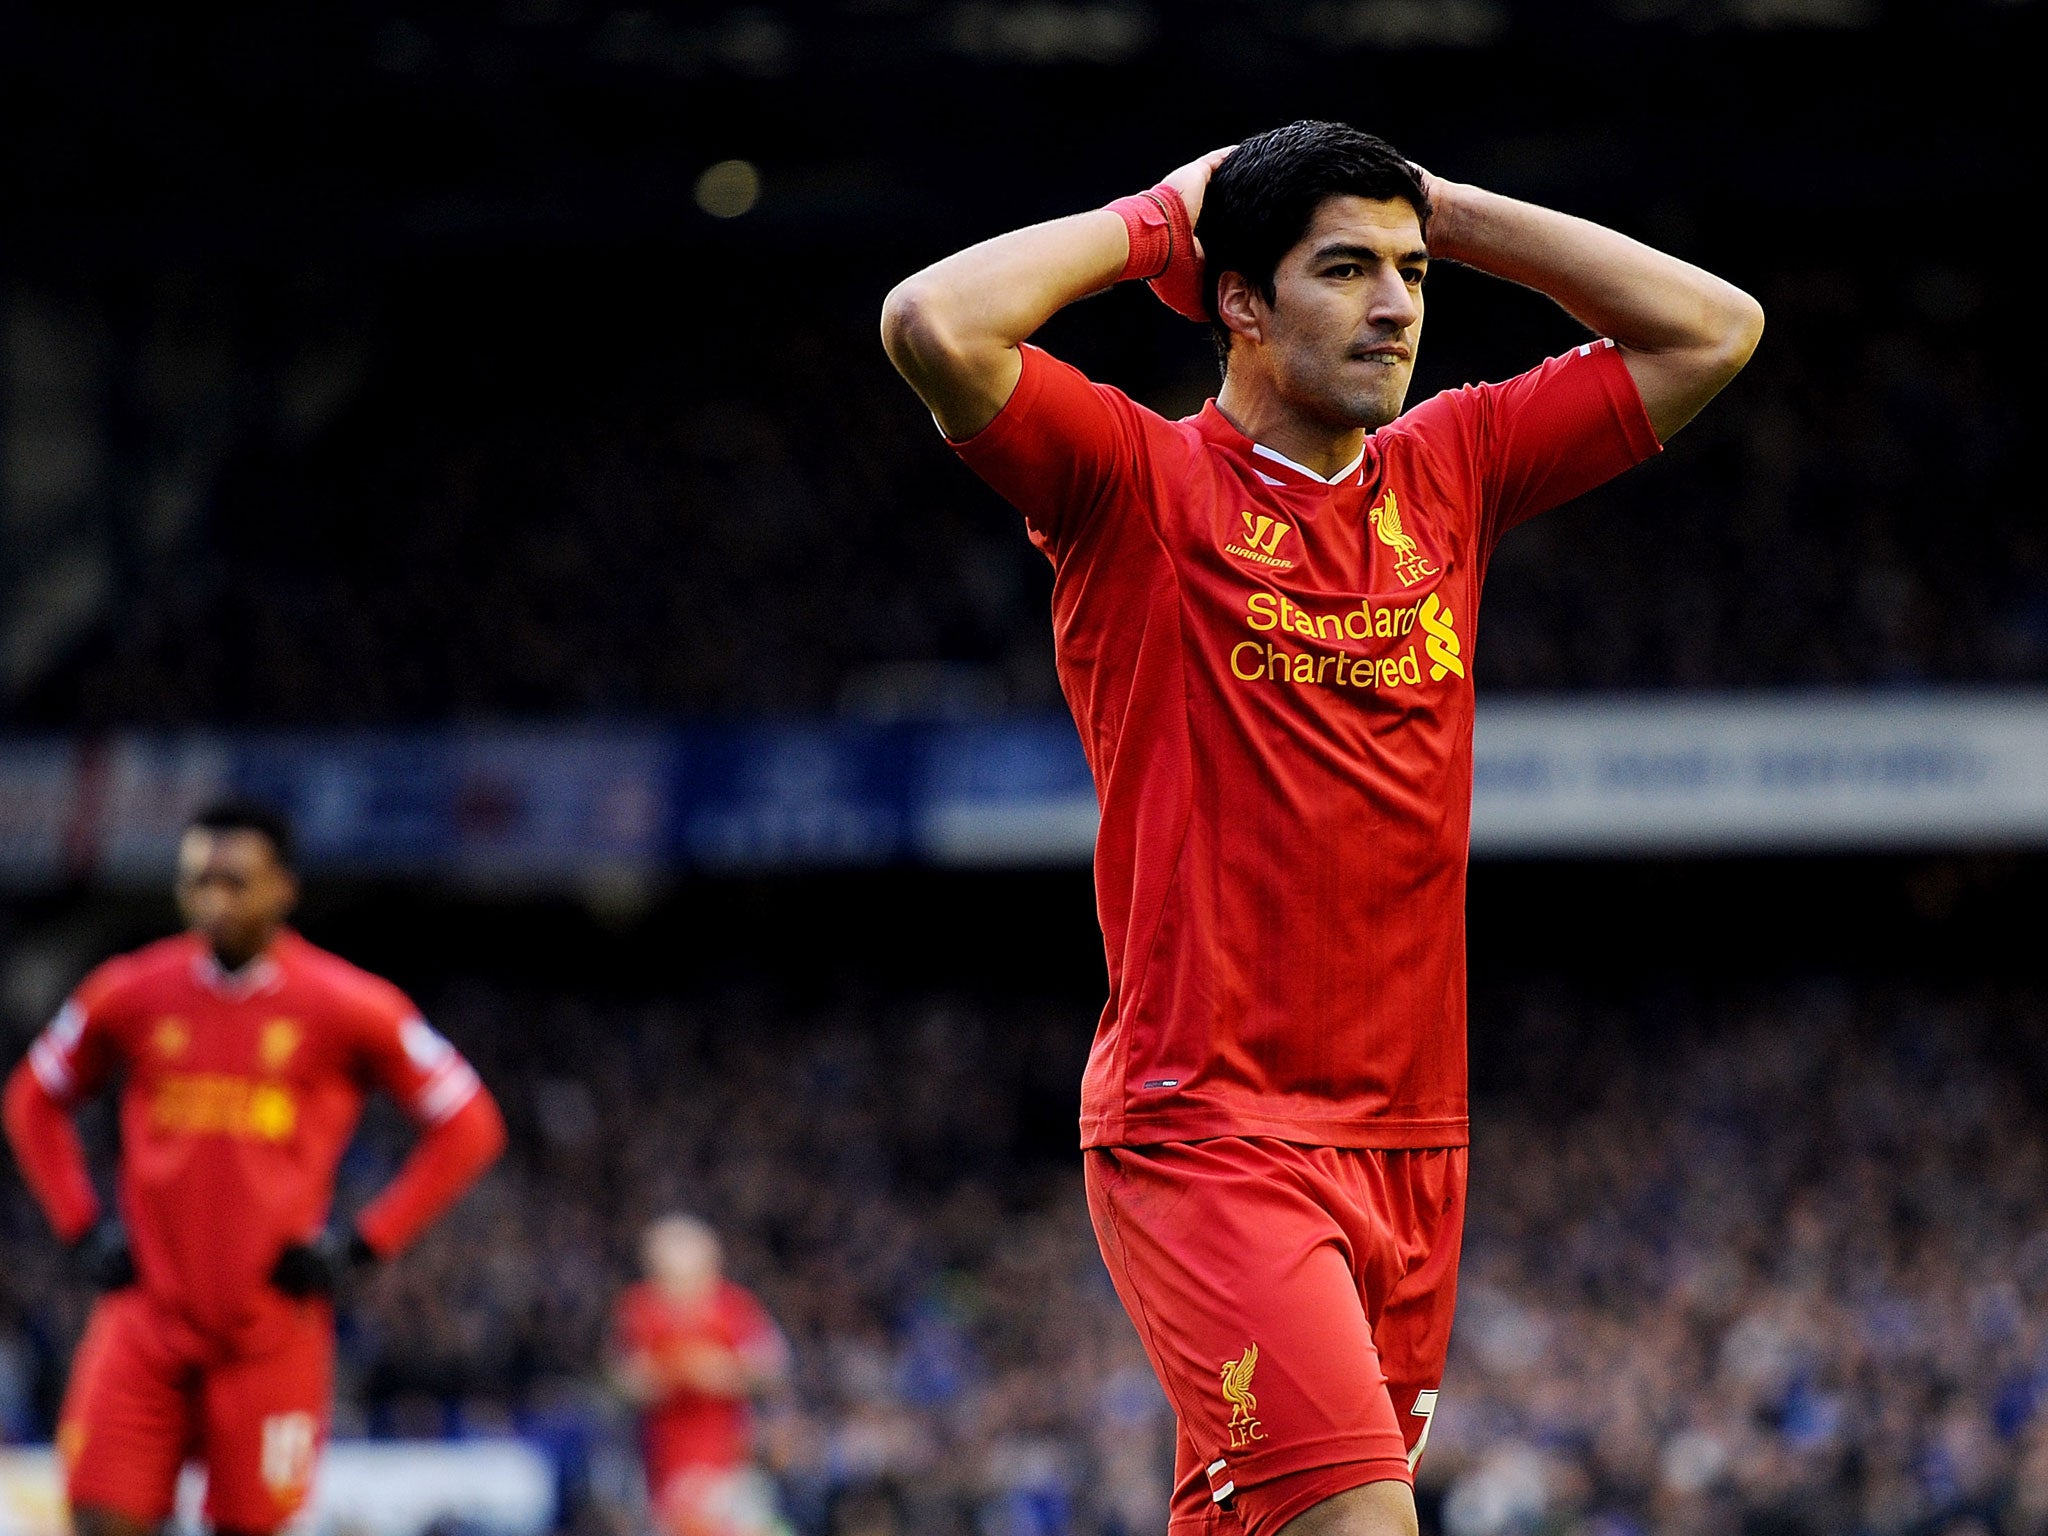 Luis Suarez looks dejected after missing a late chance to hand Liverpool victory against Merseyside rivals Everton